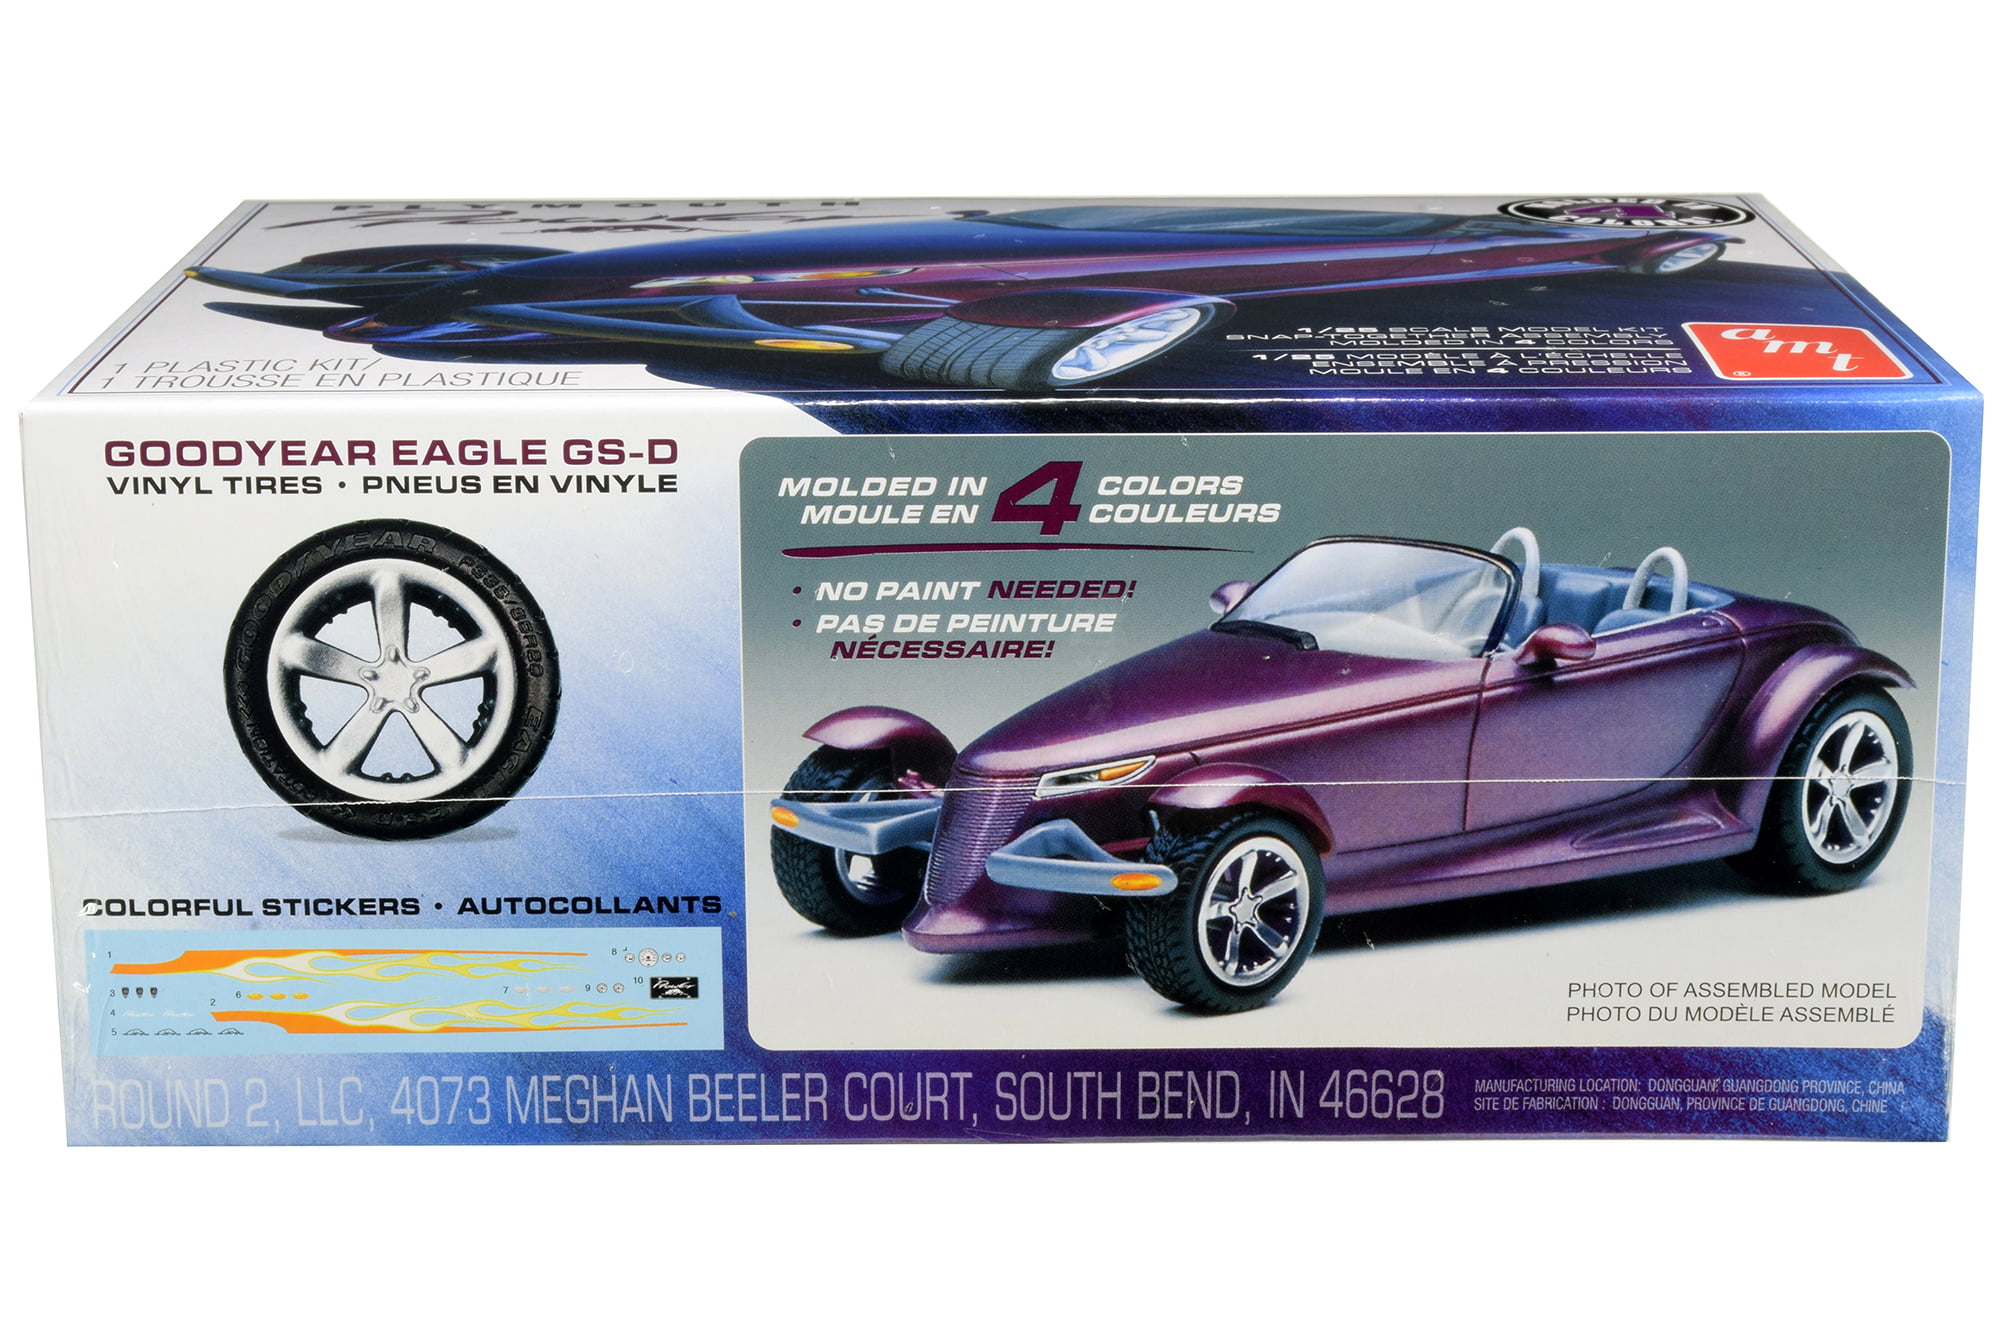 1997 Plymouth Prowler Plastic Model Kit 1/25 Scale AMT ERTL With Trailer Skill 2 for sale online 